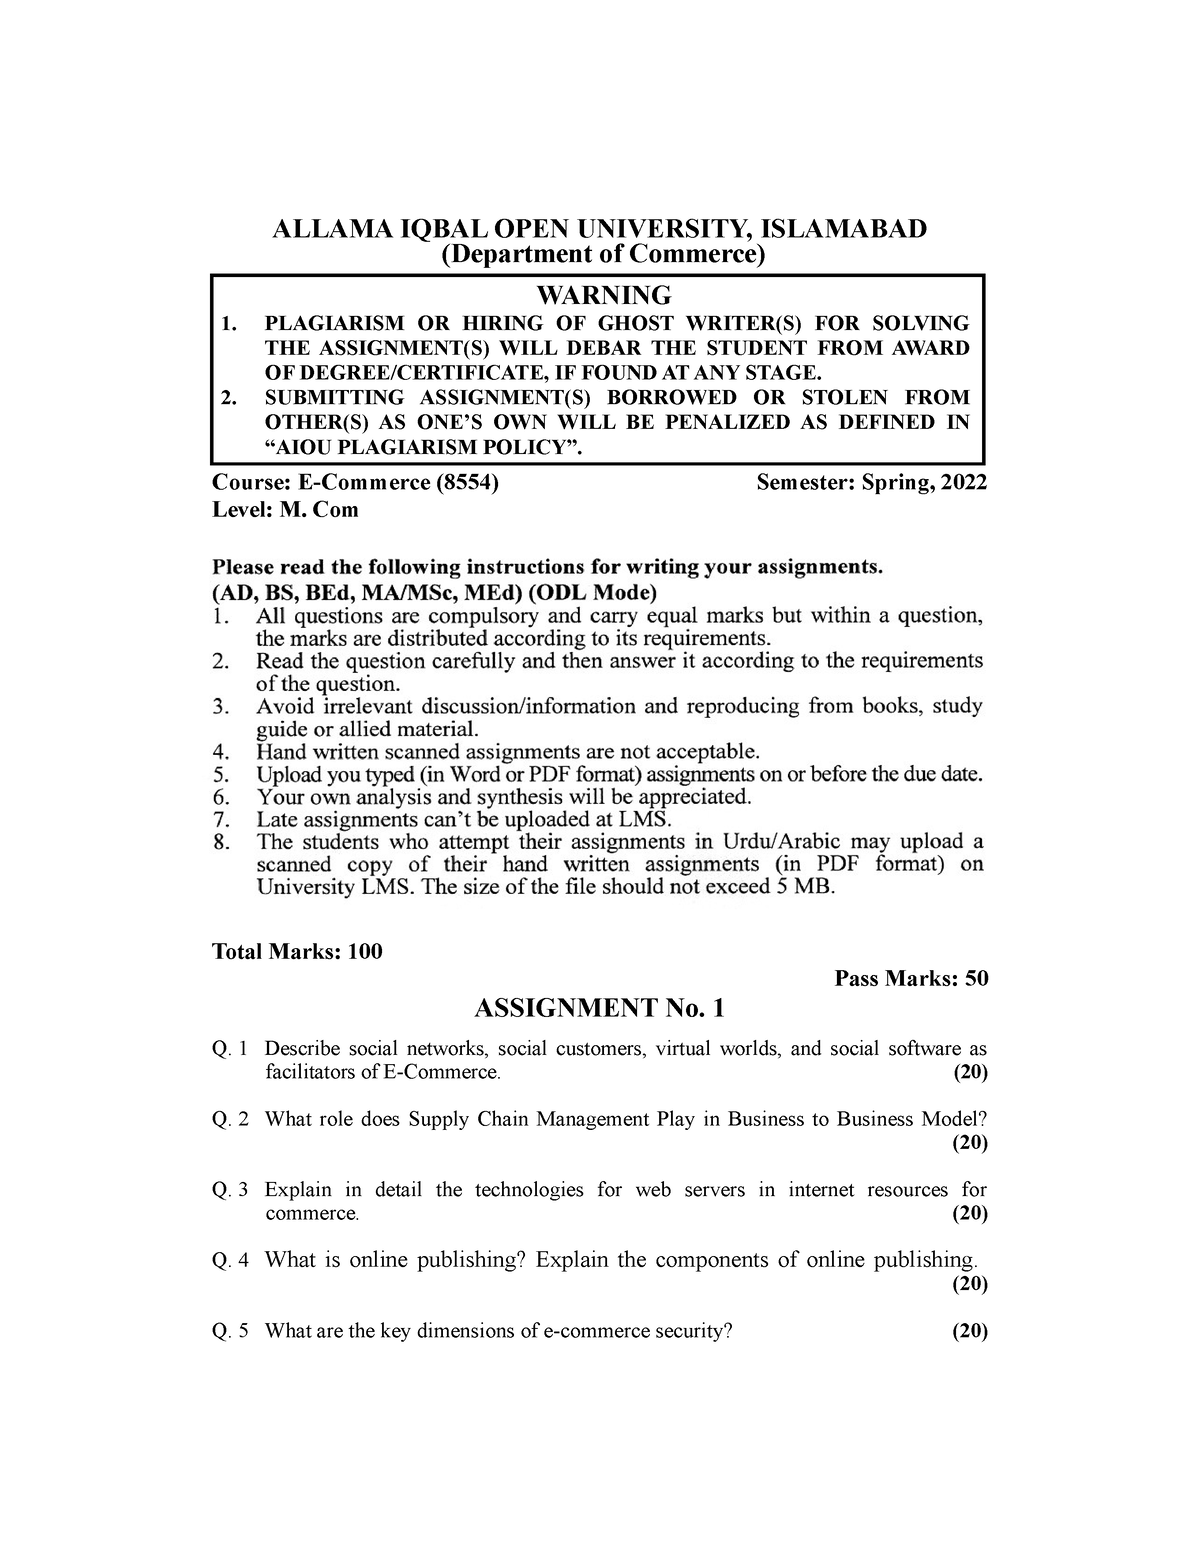 allama iqbal open university assignment front page